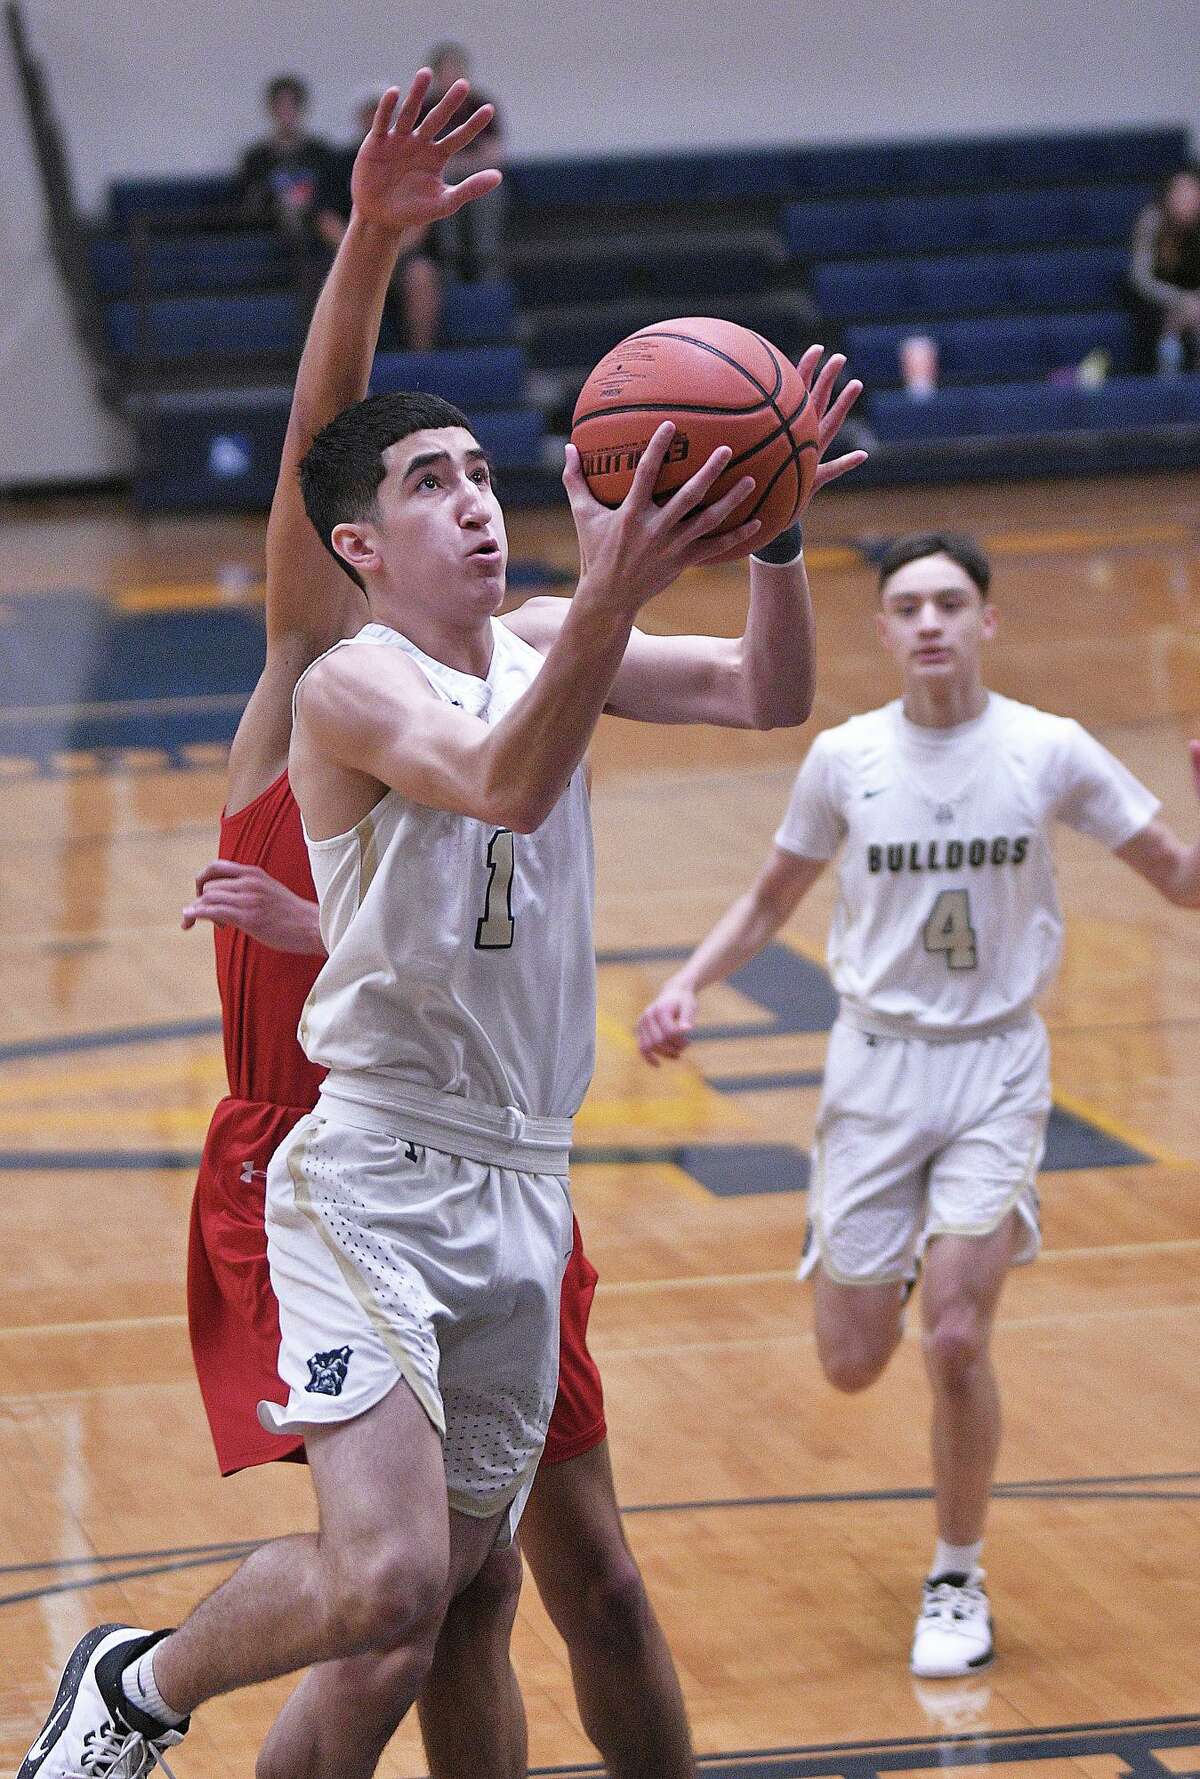 Adrian Orozco is averaging 12.2 points during district play.